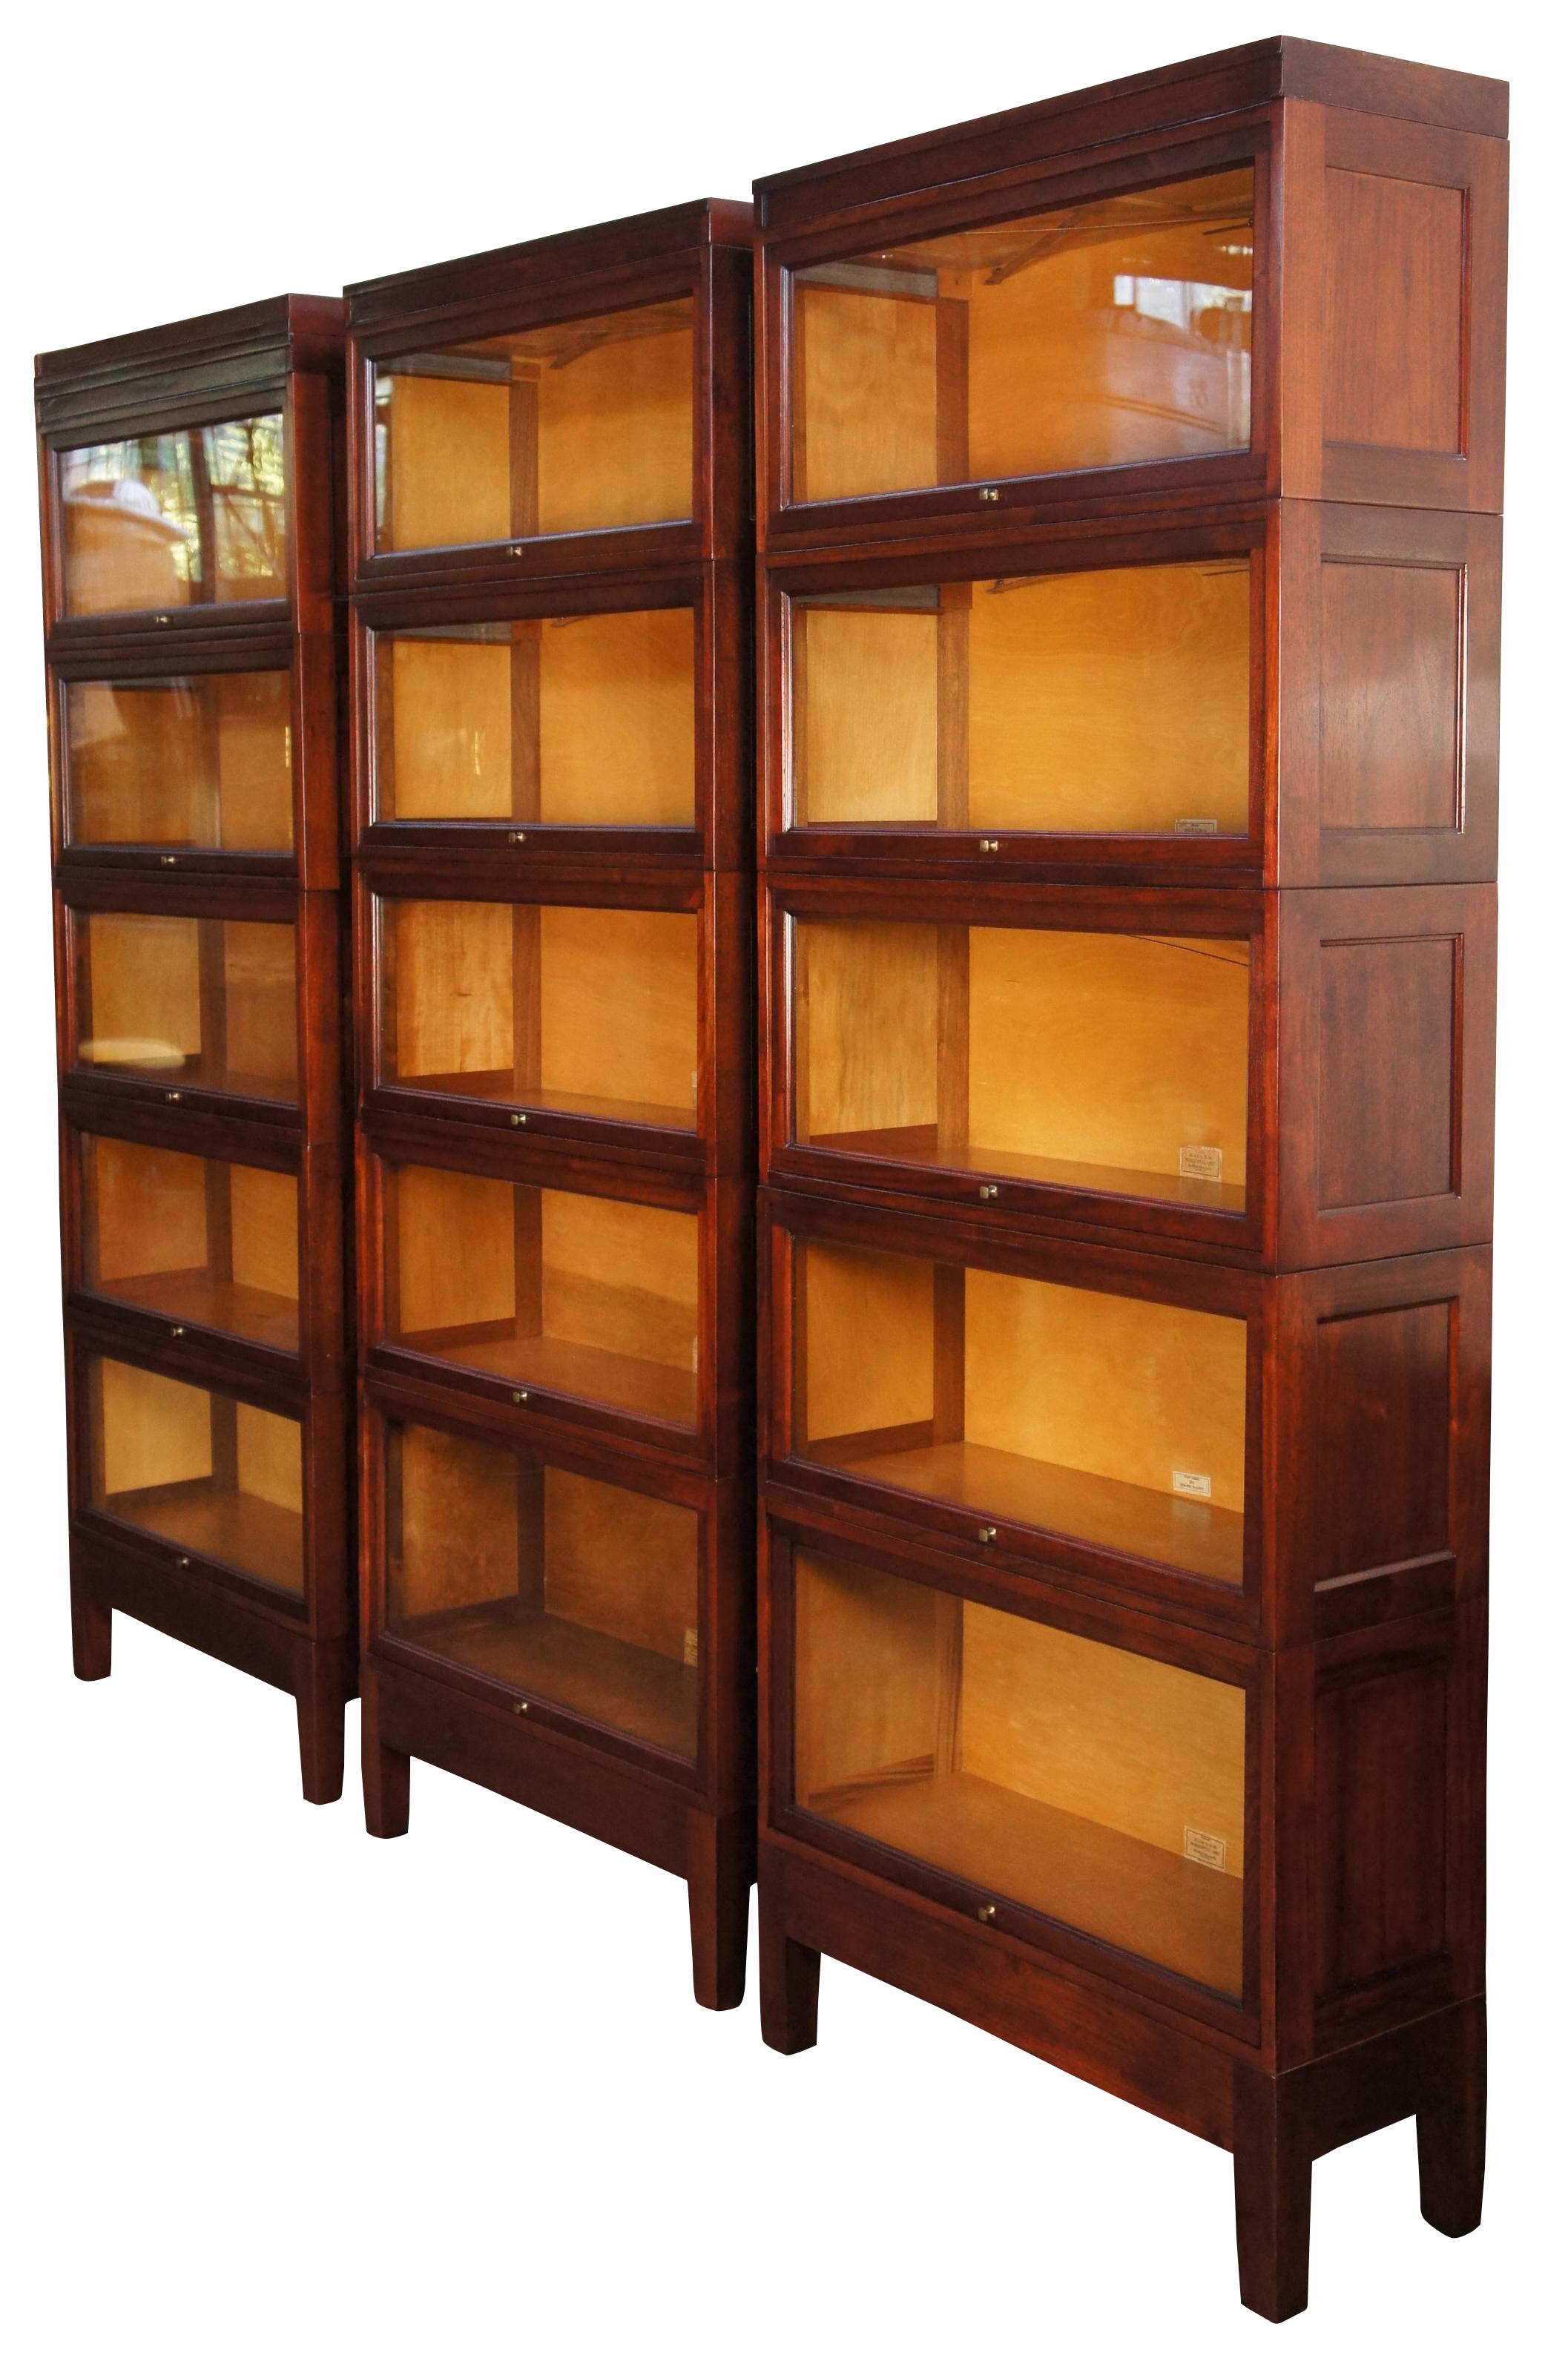 An amazing trio of Globe Wernicke Mission stacking library Bookcases, circa 1940s. Made of Genuine Walnut, Finish Number 374. Unit number 3313-B. GG. D. 14 & 16 Horizontal Units. Each set features a stack of 5 with original glass, brass hardware,